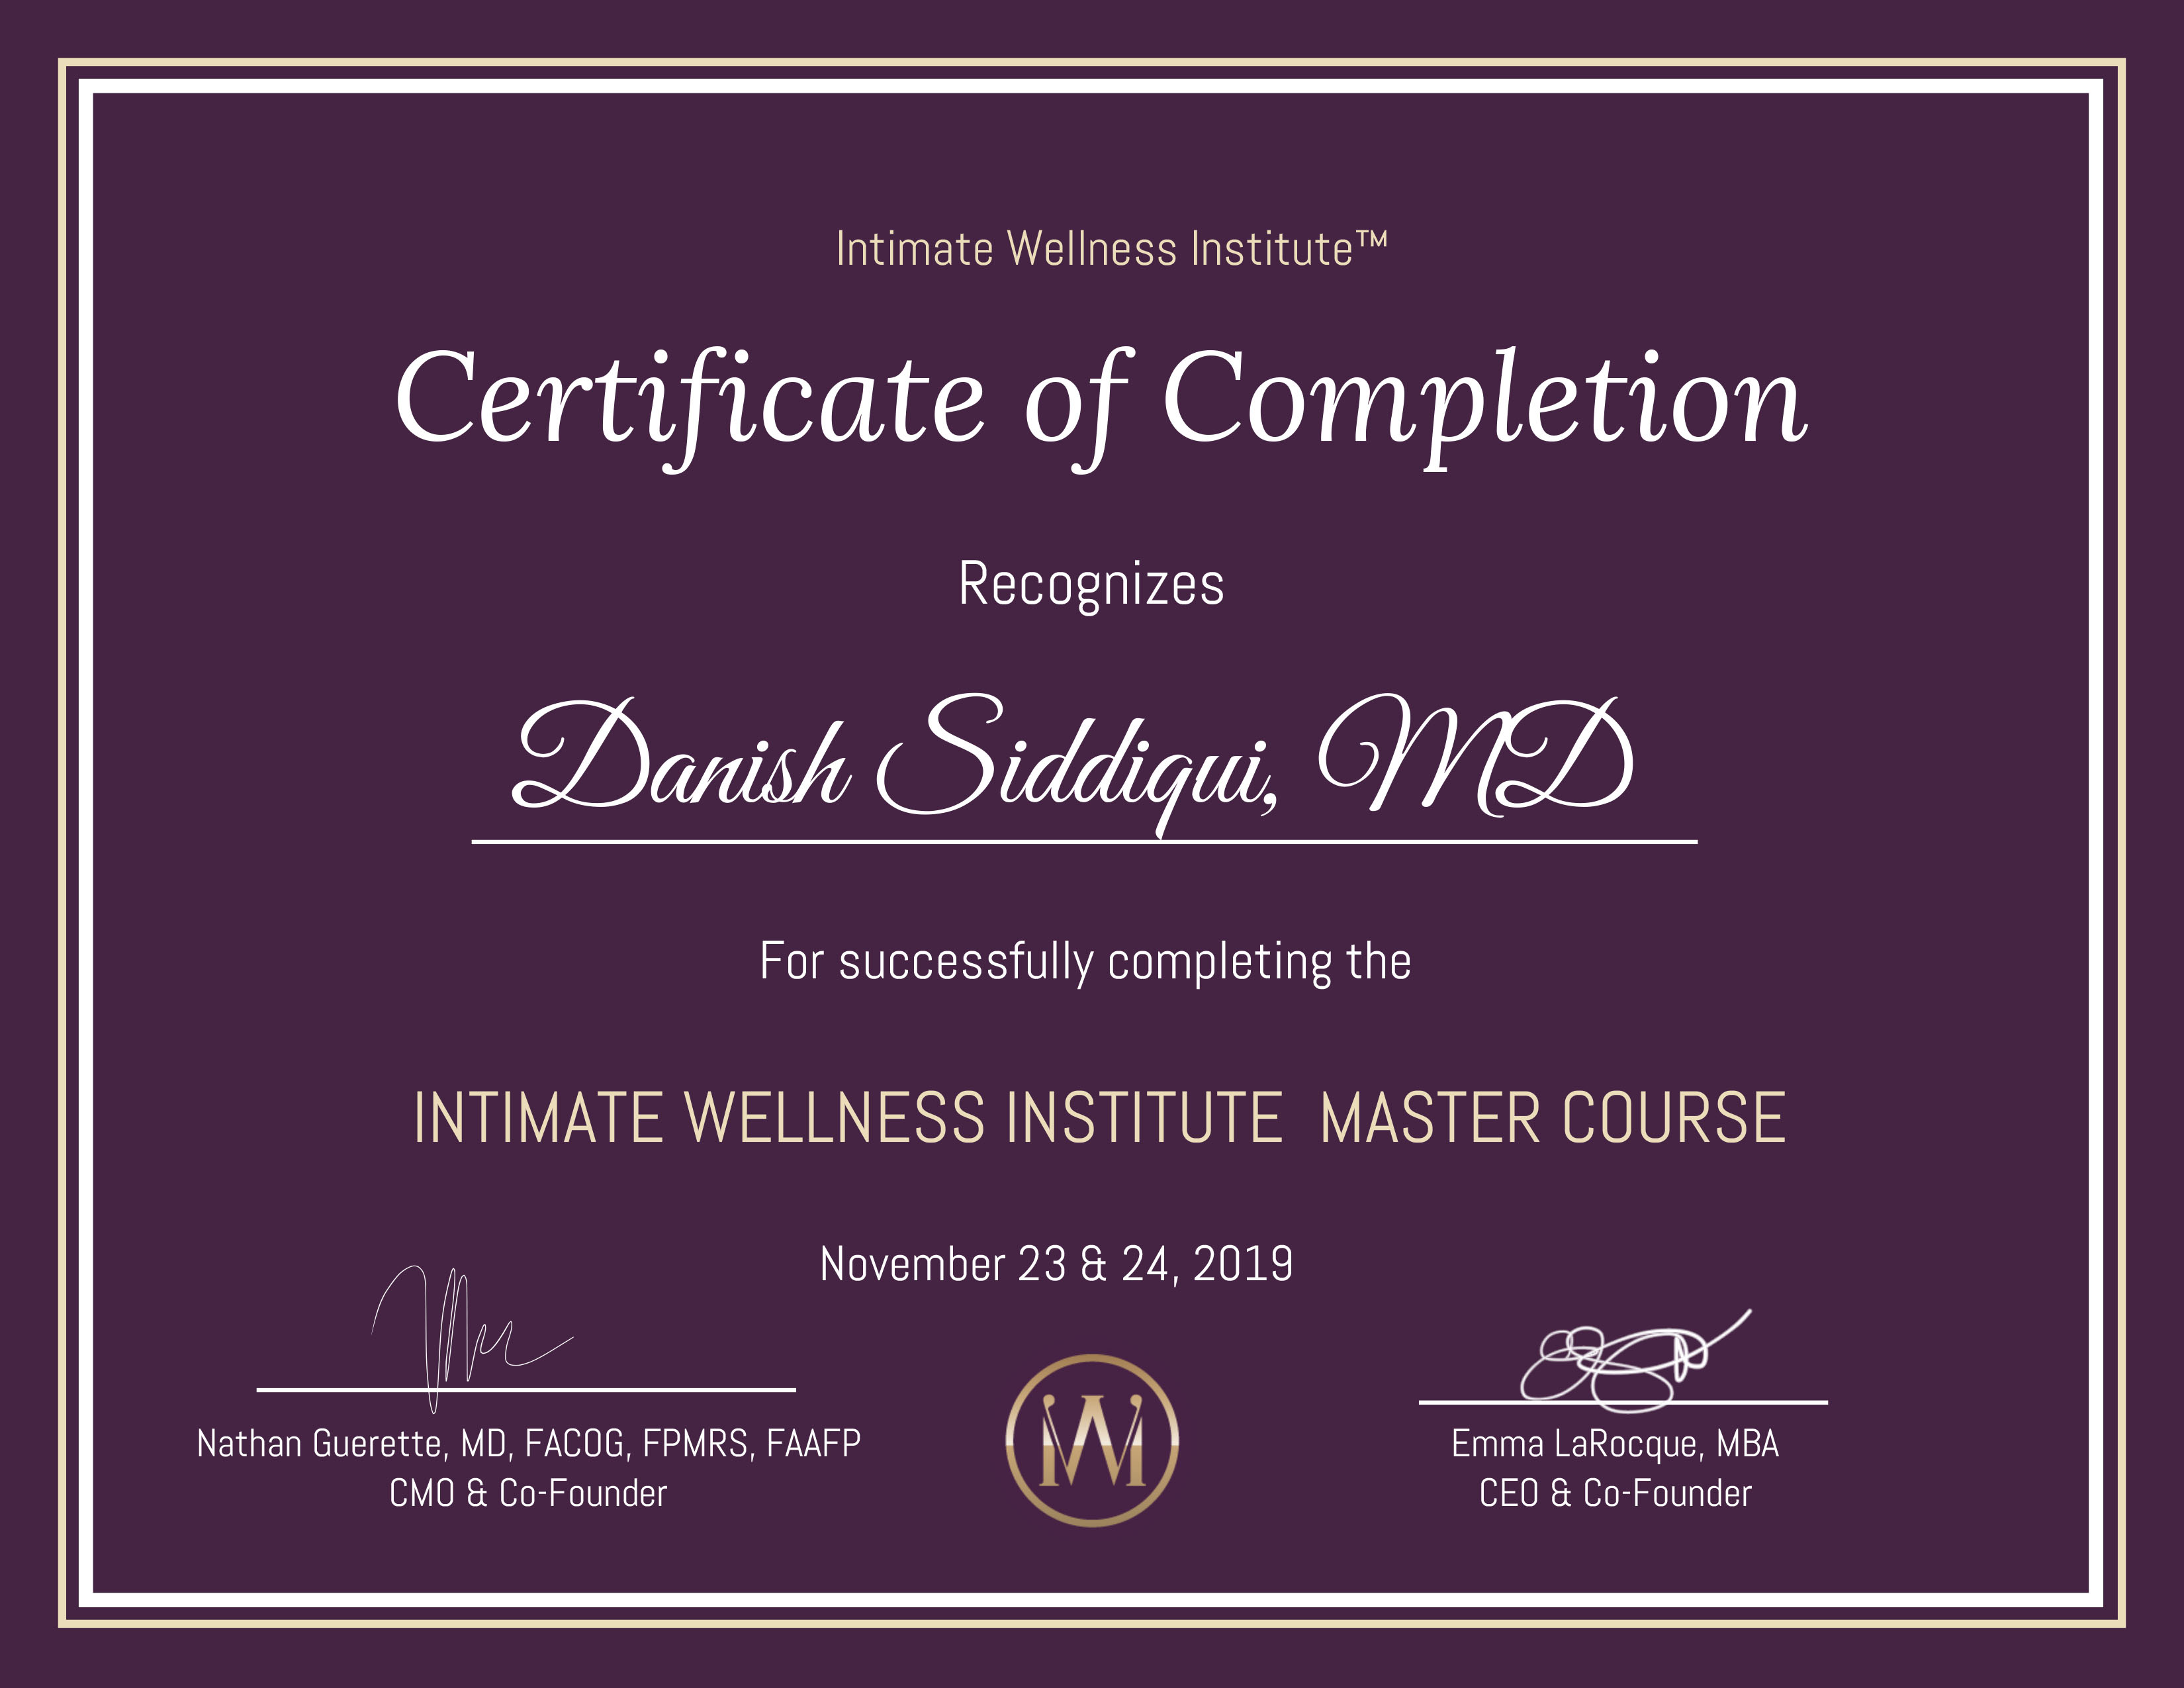 Dr. Danish Siddiqui successfully completed the Intimate Wellness Institute Master Course